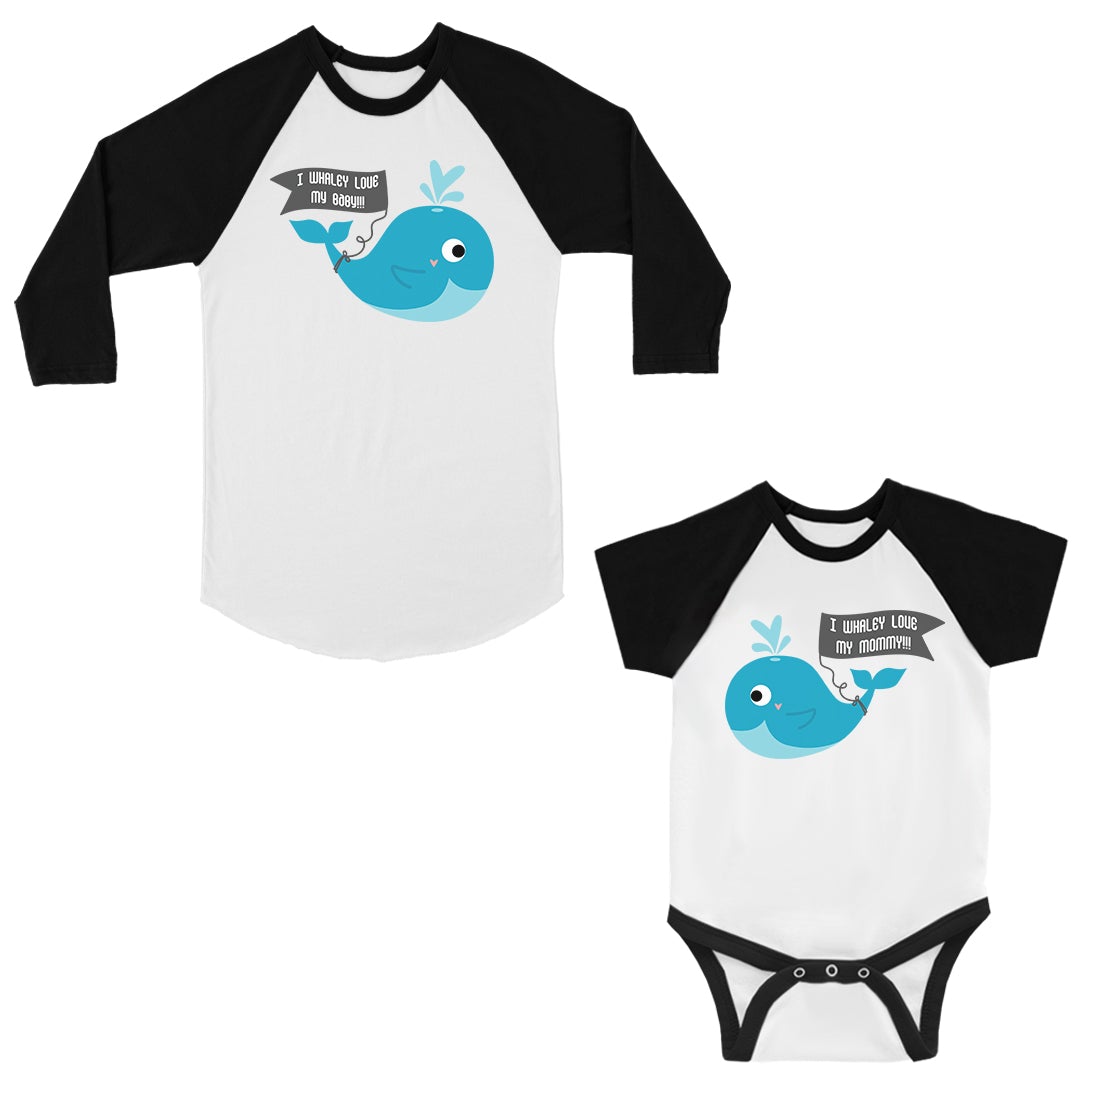 Whaley Love Baby Mom Mom and Baby Matching Baseball Jerseys Gifts Black and White